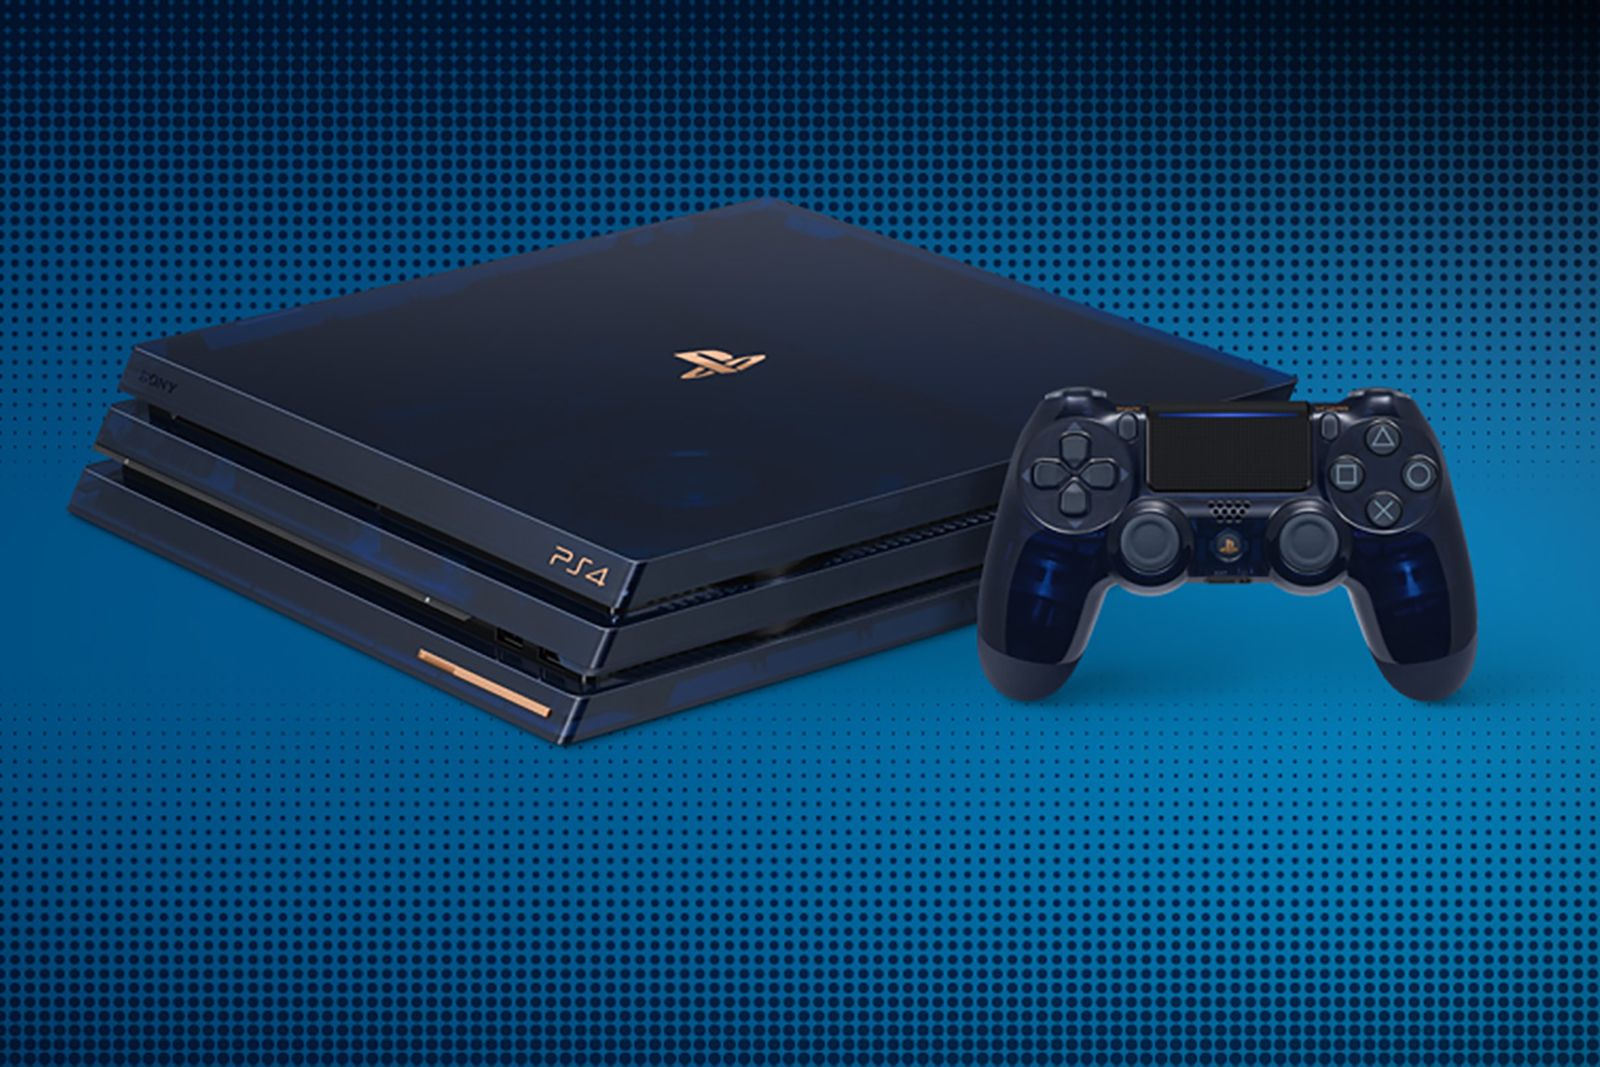 Stunning 500 Million Edition PS4 Pro has 2TB hard drive and translucent blue case image 1